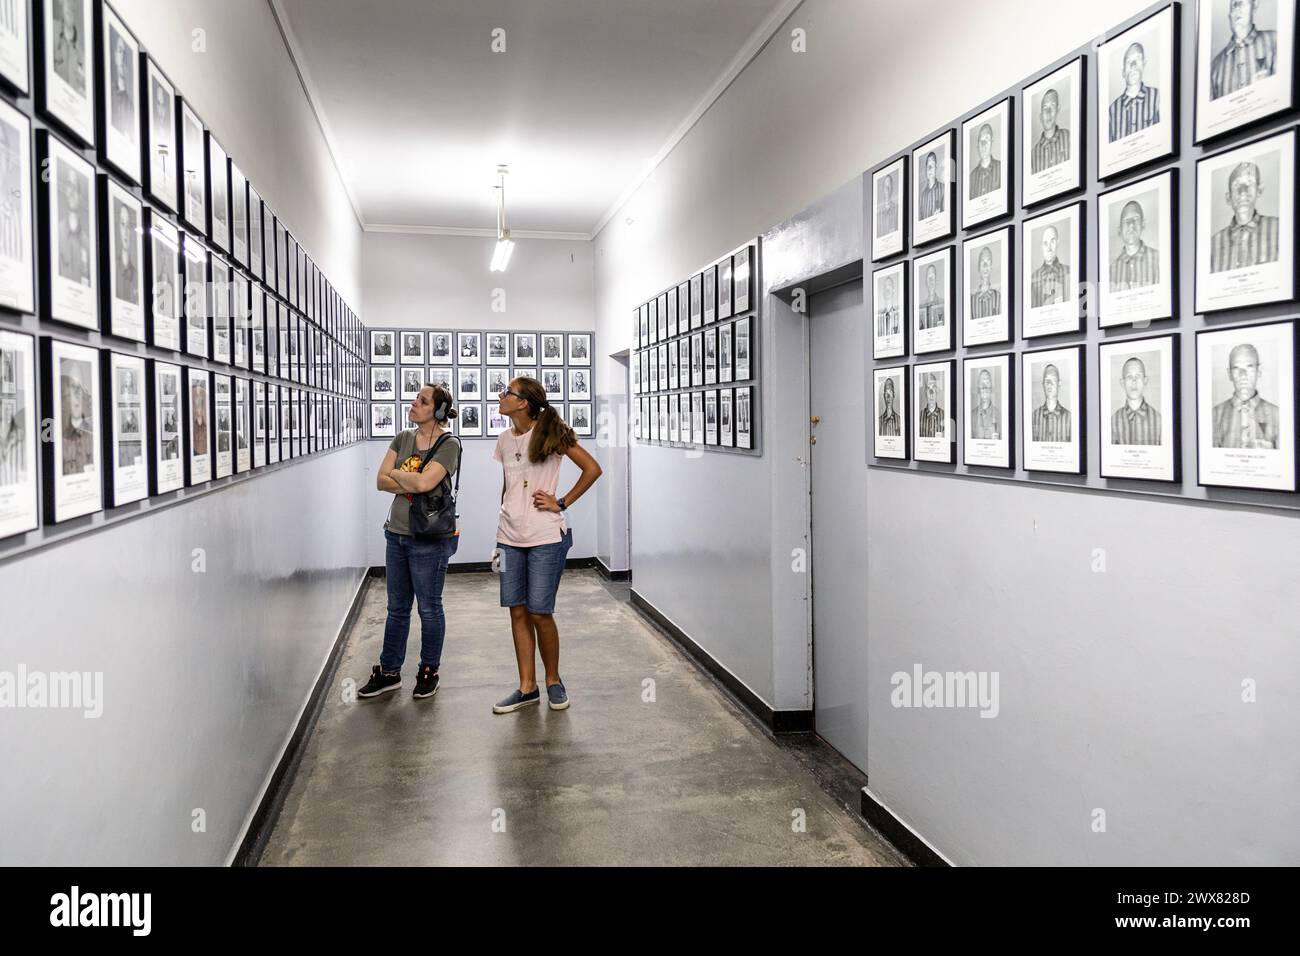 Two women looking at exhibition of photos of prisoners at the Auschwitz I concentration camp museum, Poland Stock Photo